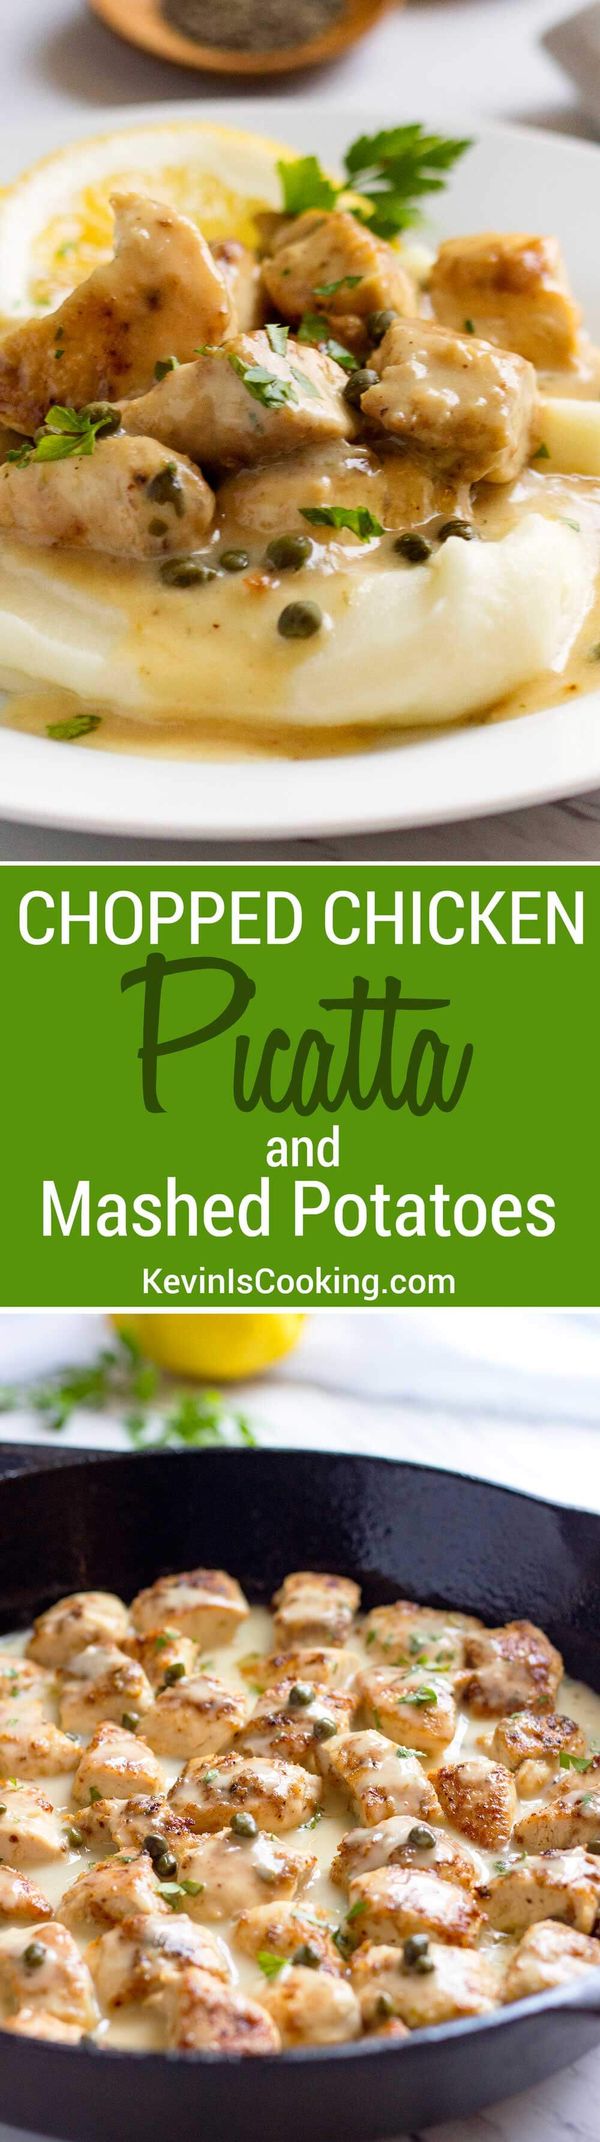 Chopped Chicken Picatta and Mashed Potatoes